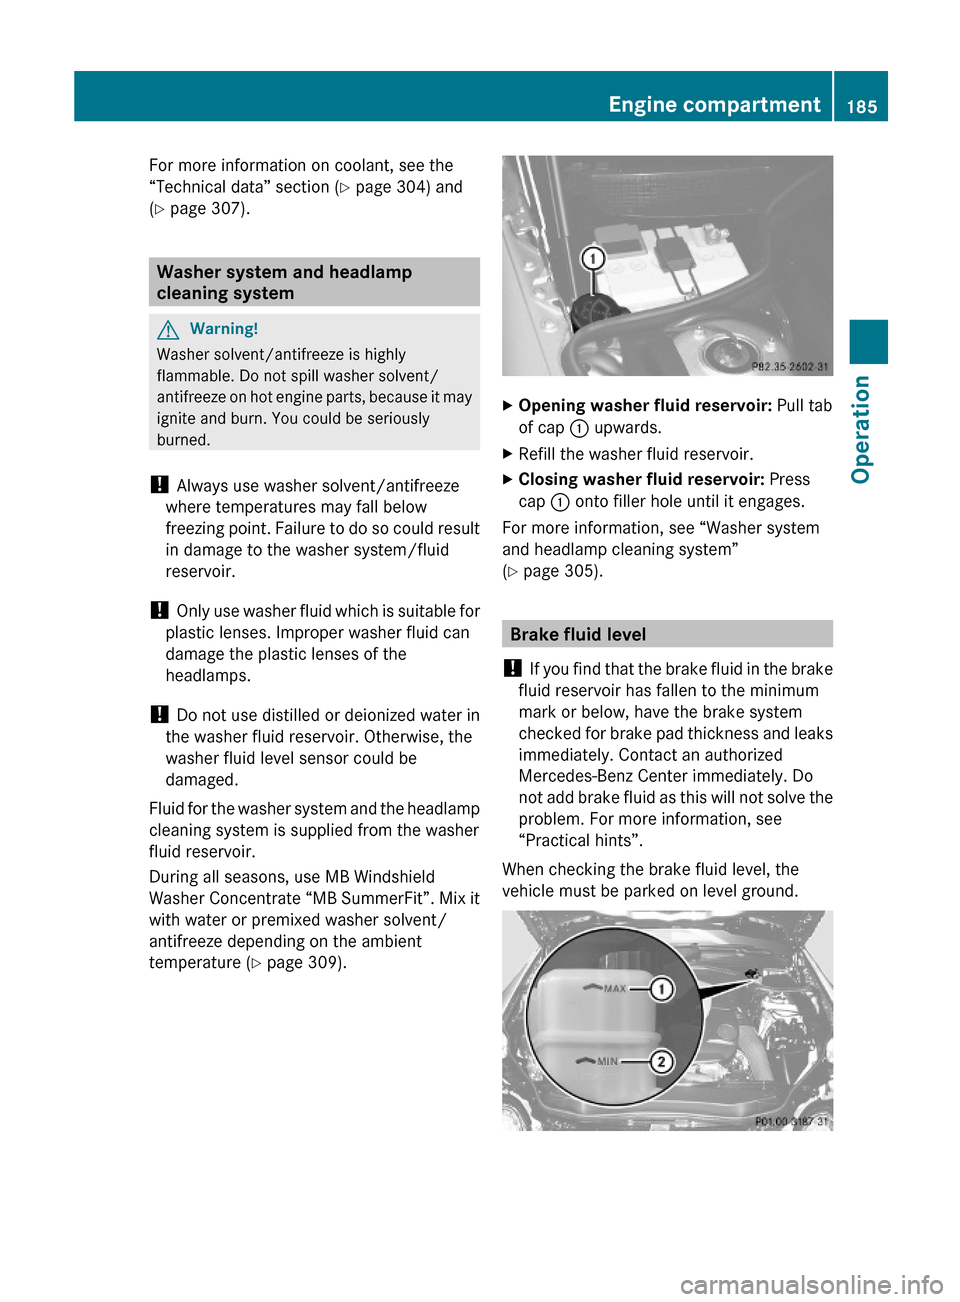 MERCEDES-BENZ SL600 2011 R230 Owners Manual For more information on coolant, see the
“Technical data” section (Y page 304) and
(Y page 307).
Washer system and headlamp 
cleaning system
GWarning!
Washer solvent/antifreeze is highly
flammable